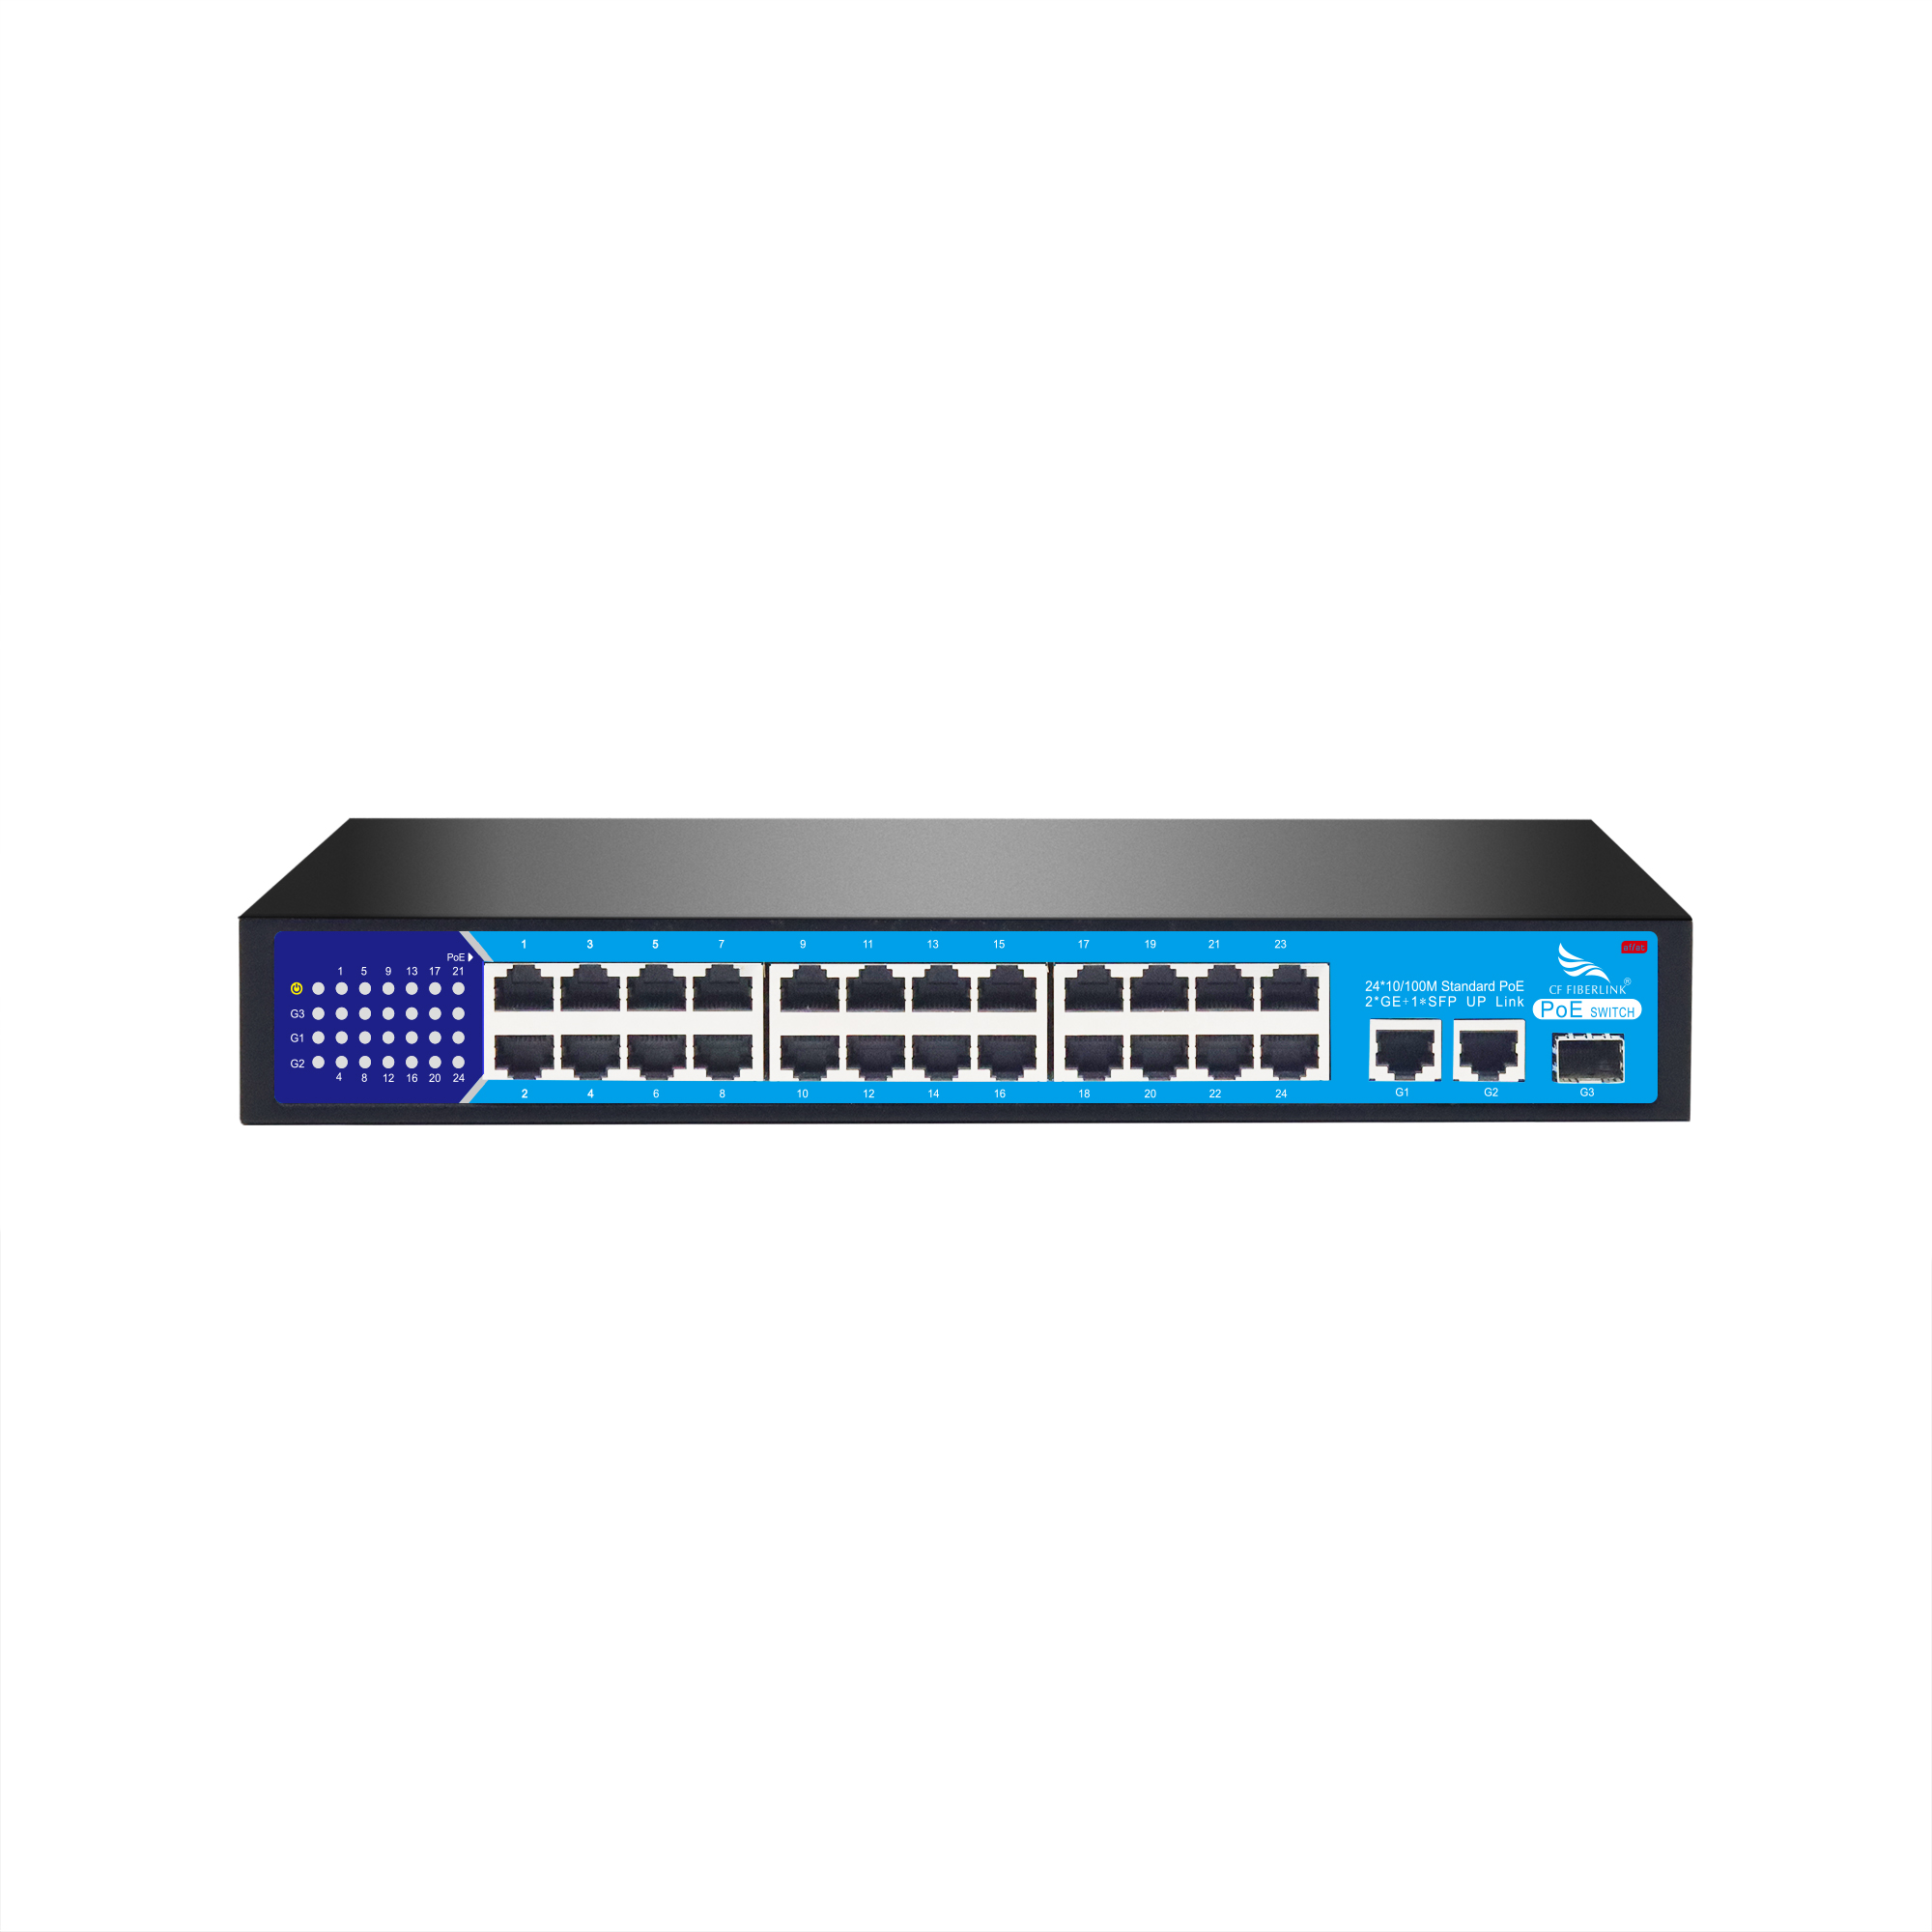 27-port 10/100/1000M Ethernet Switch Featured Image